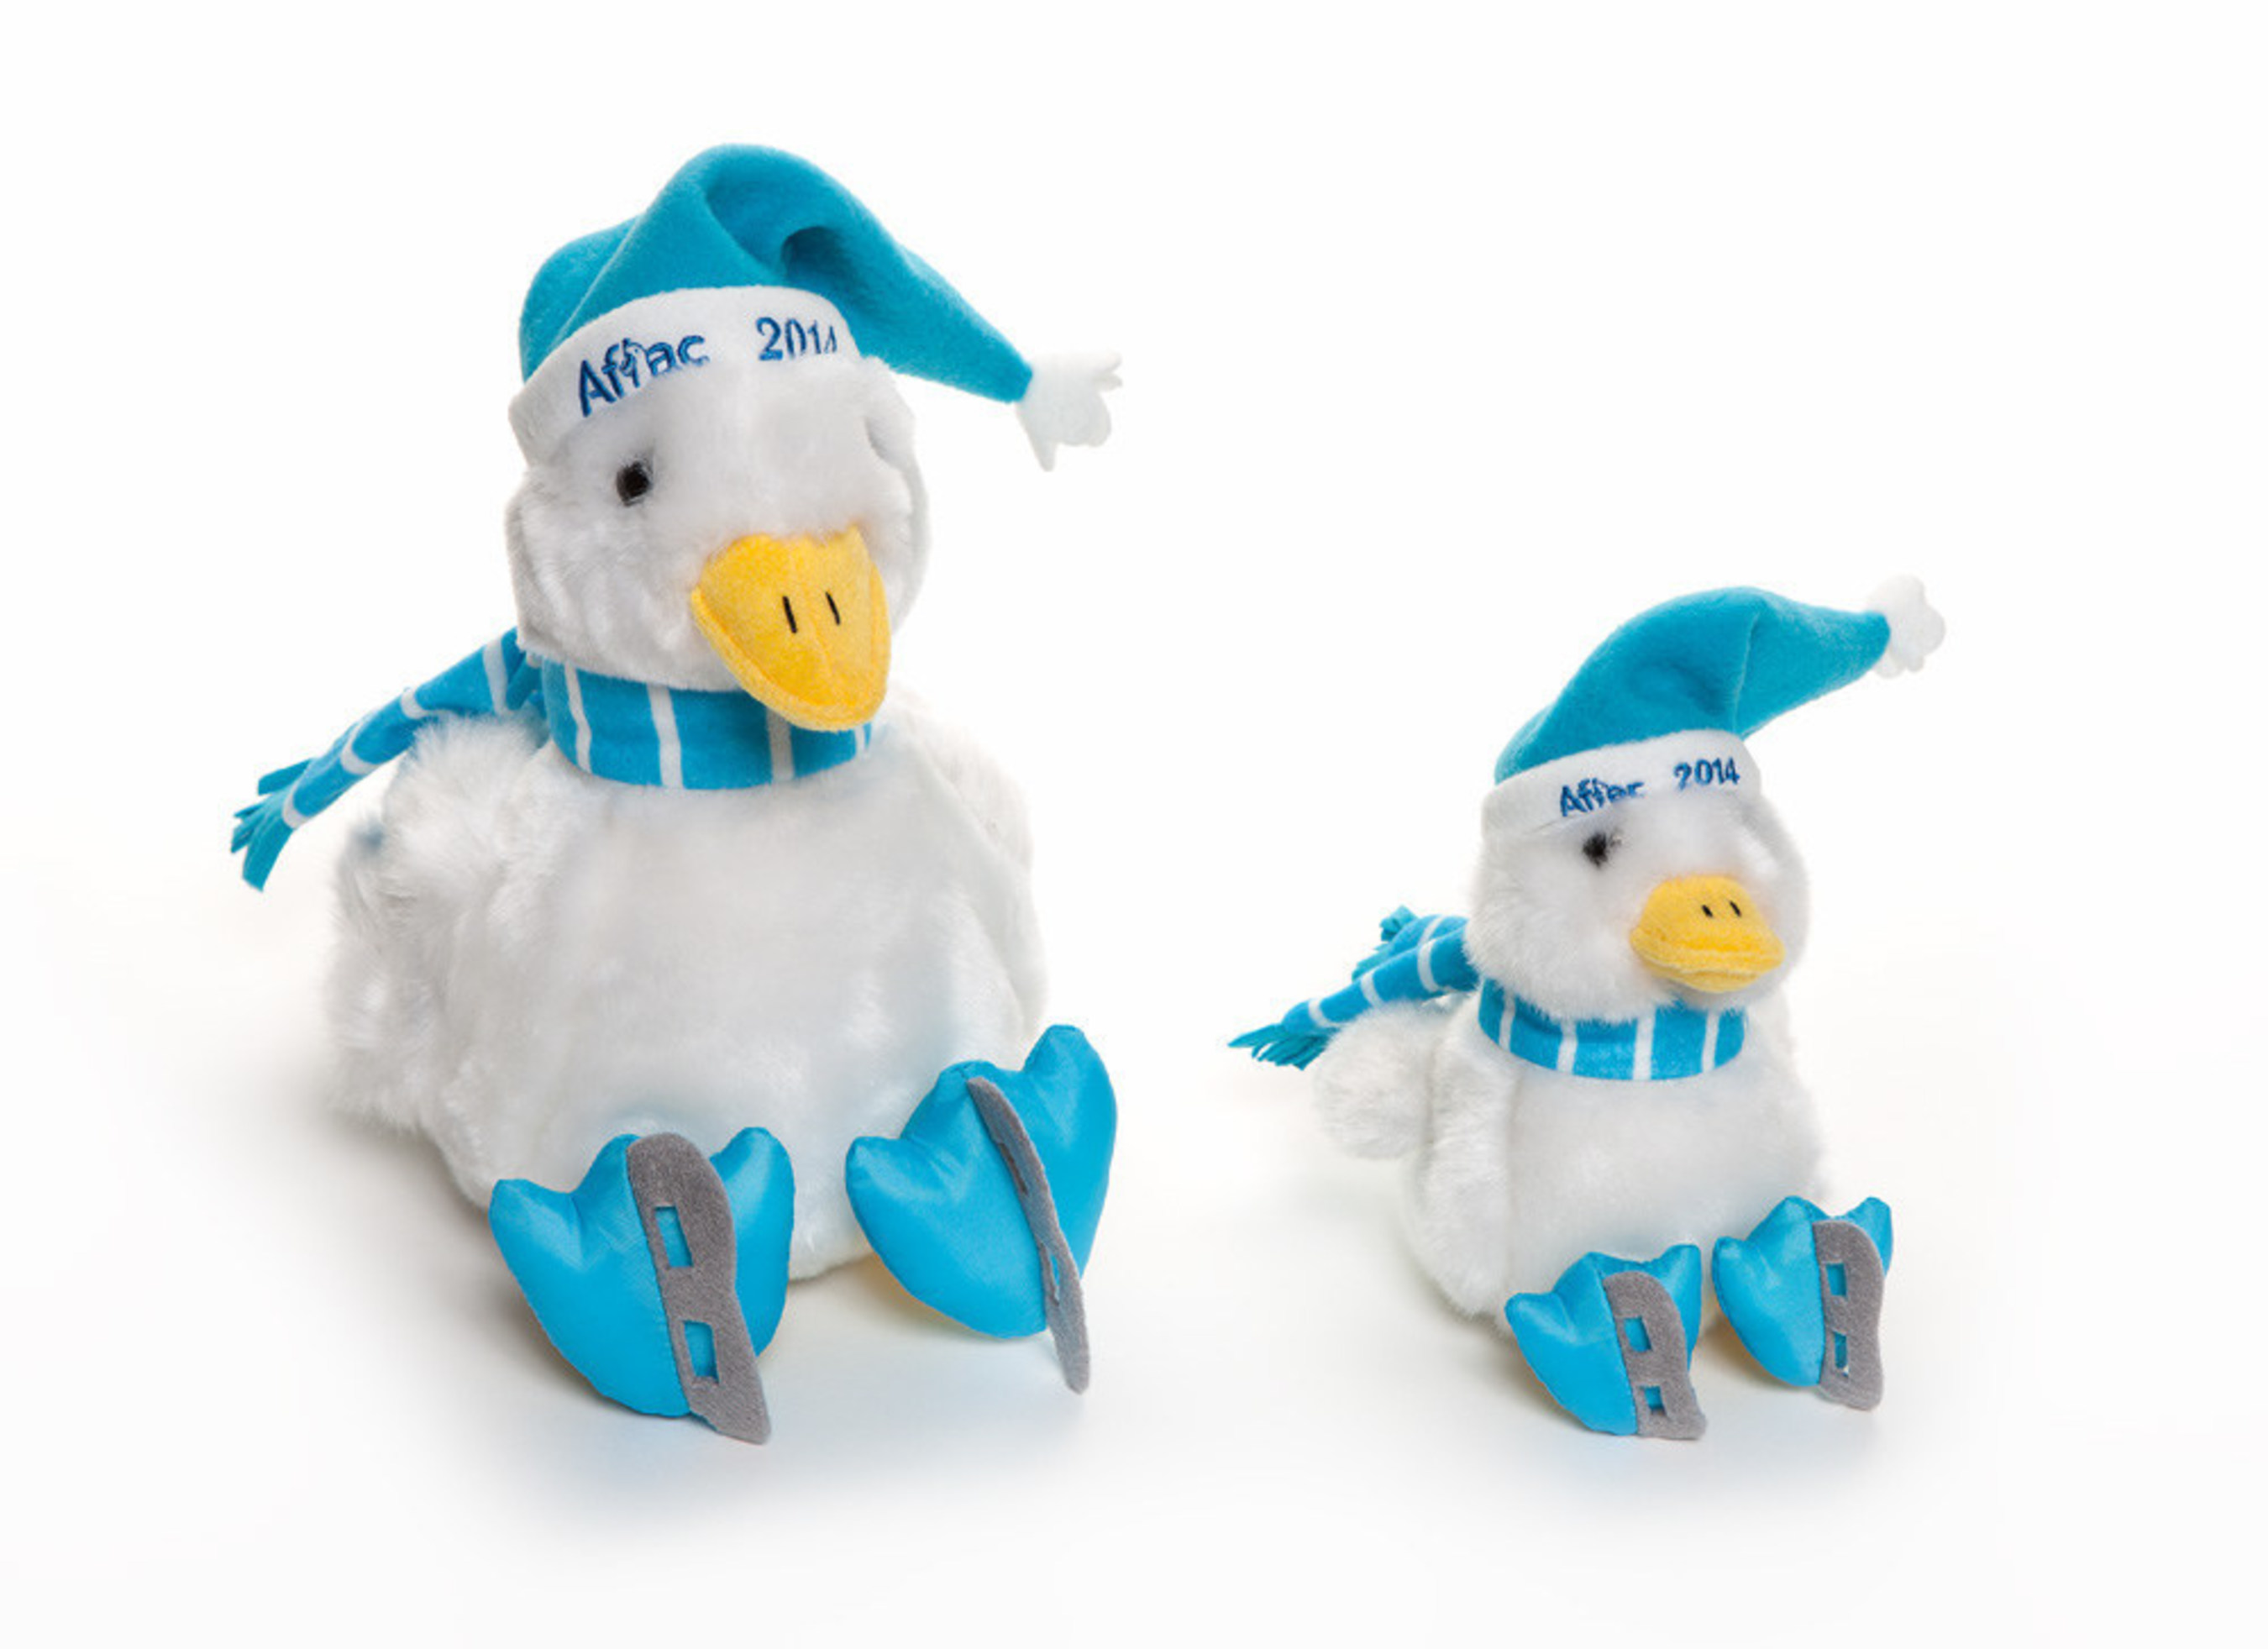 The 2014 Aflac Holiday Duck is available at Macy's or at Aflacduckprints.com. All of the net proceeds go toward the treatment and research of children's cancer.